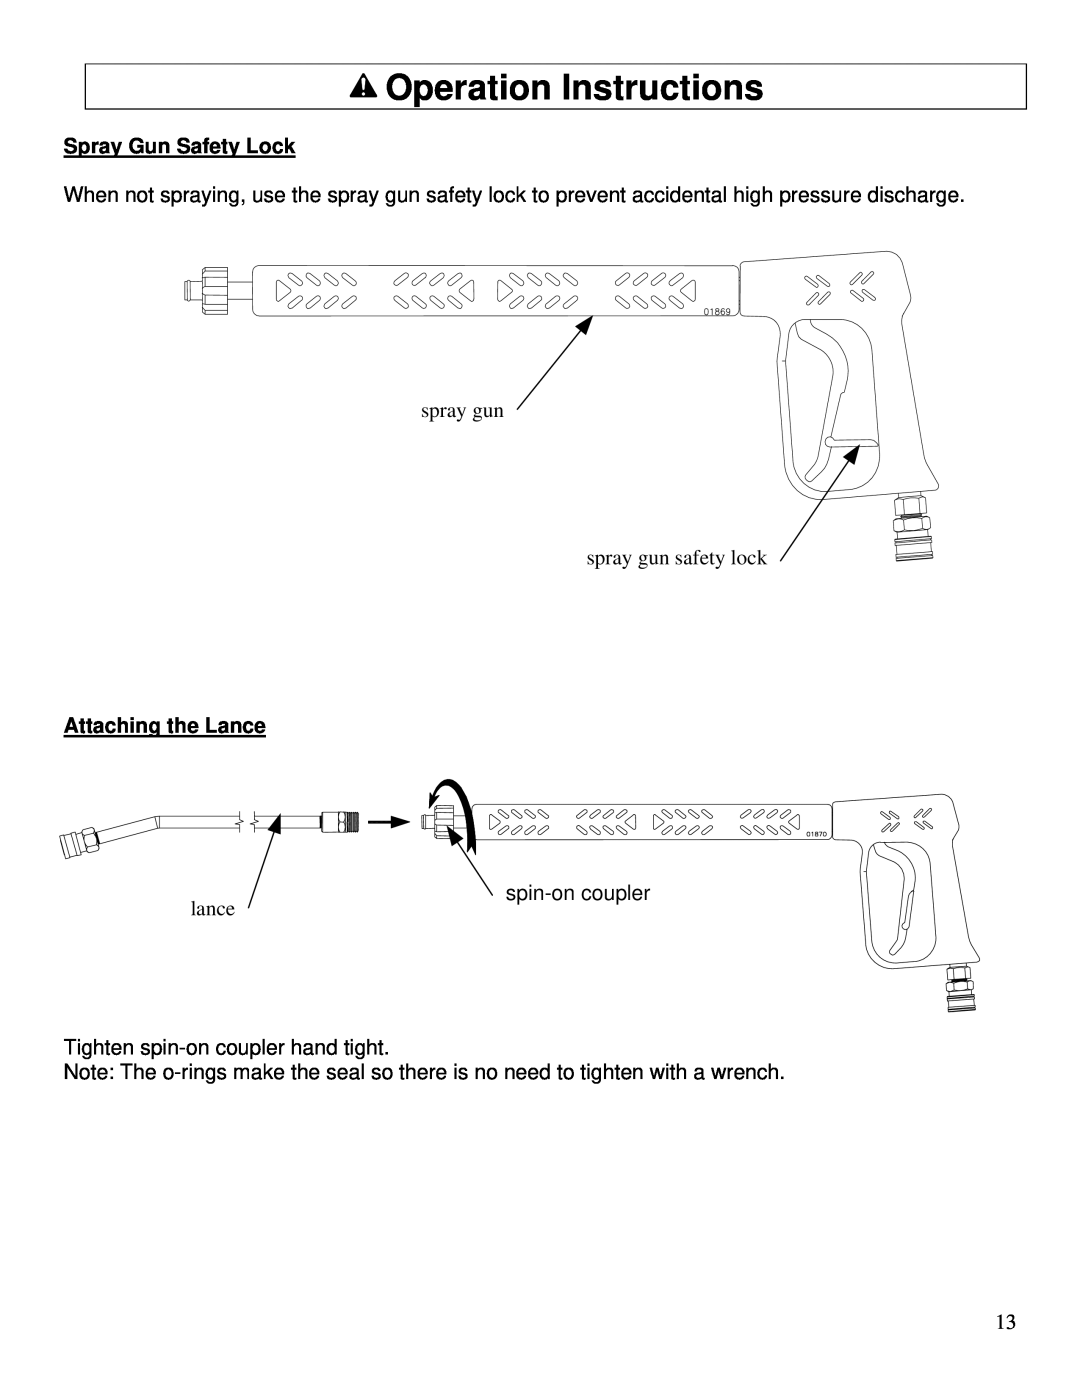 North Star M157300E Operation Instructions, Spray Gun Safety Lock, spray gun spray gun safety lock, Attaching the Lance 